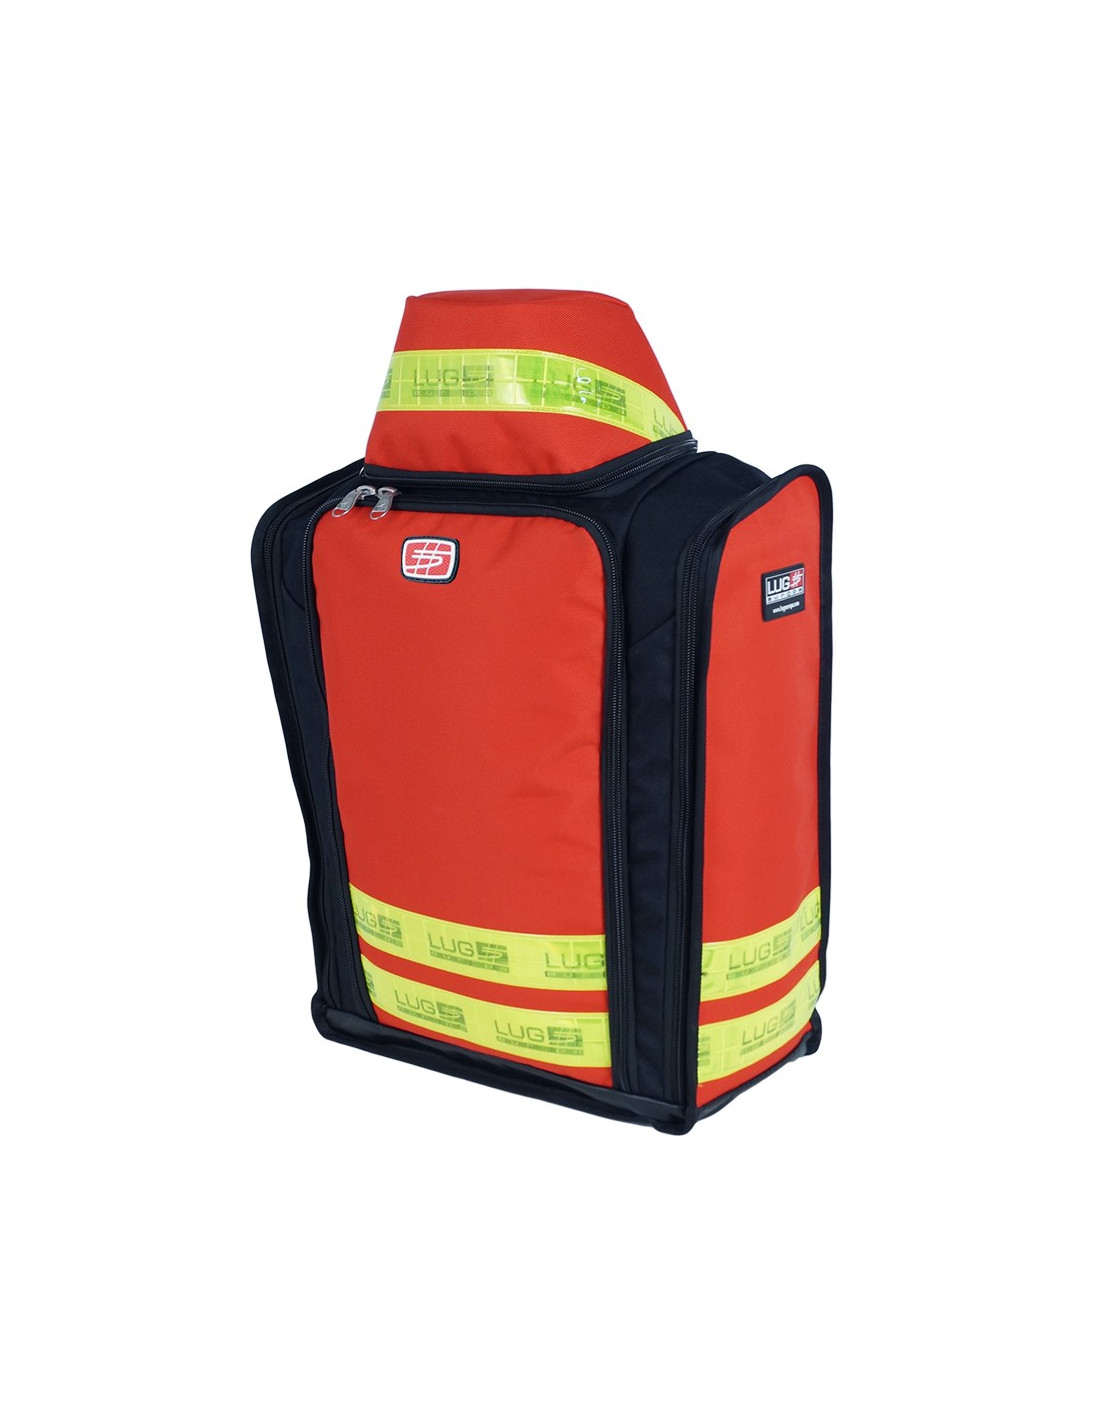 sac-secours-medical-o2-gamme-medicale